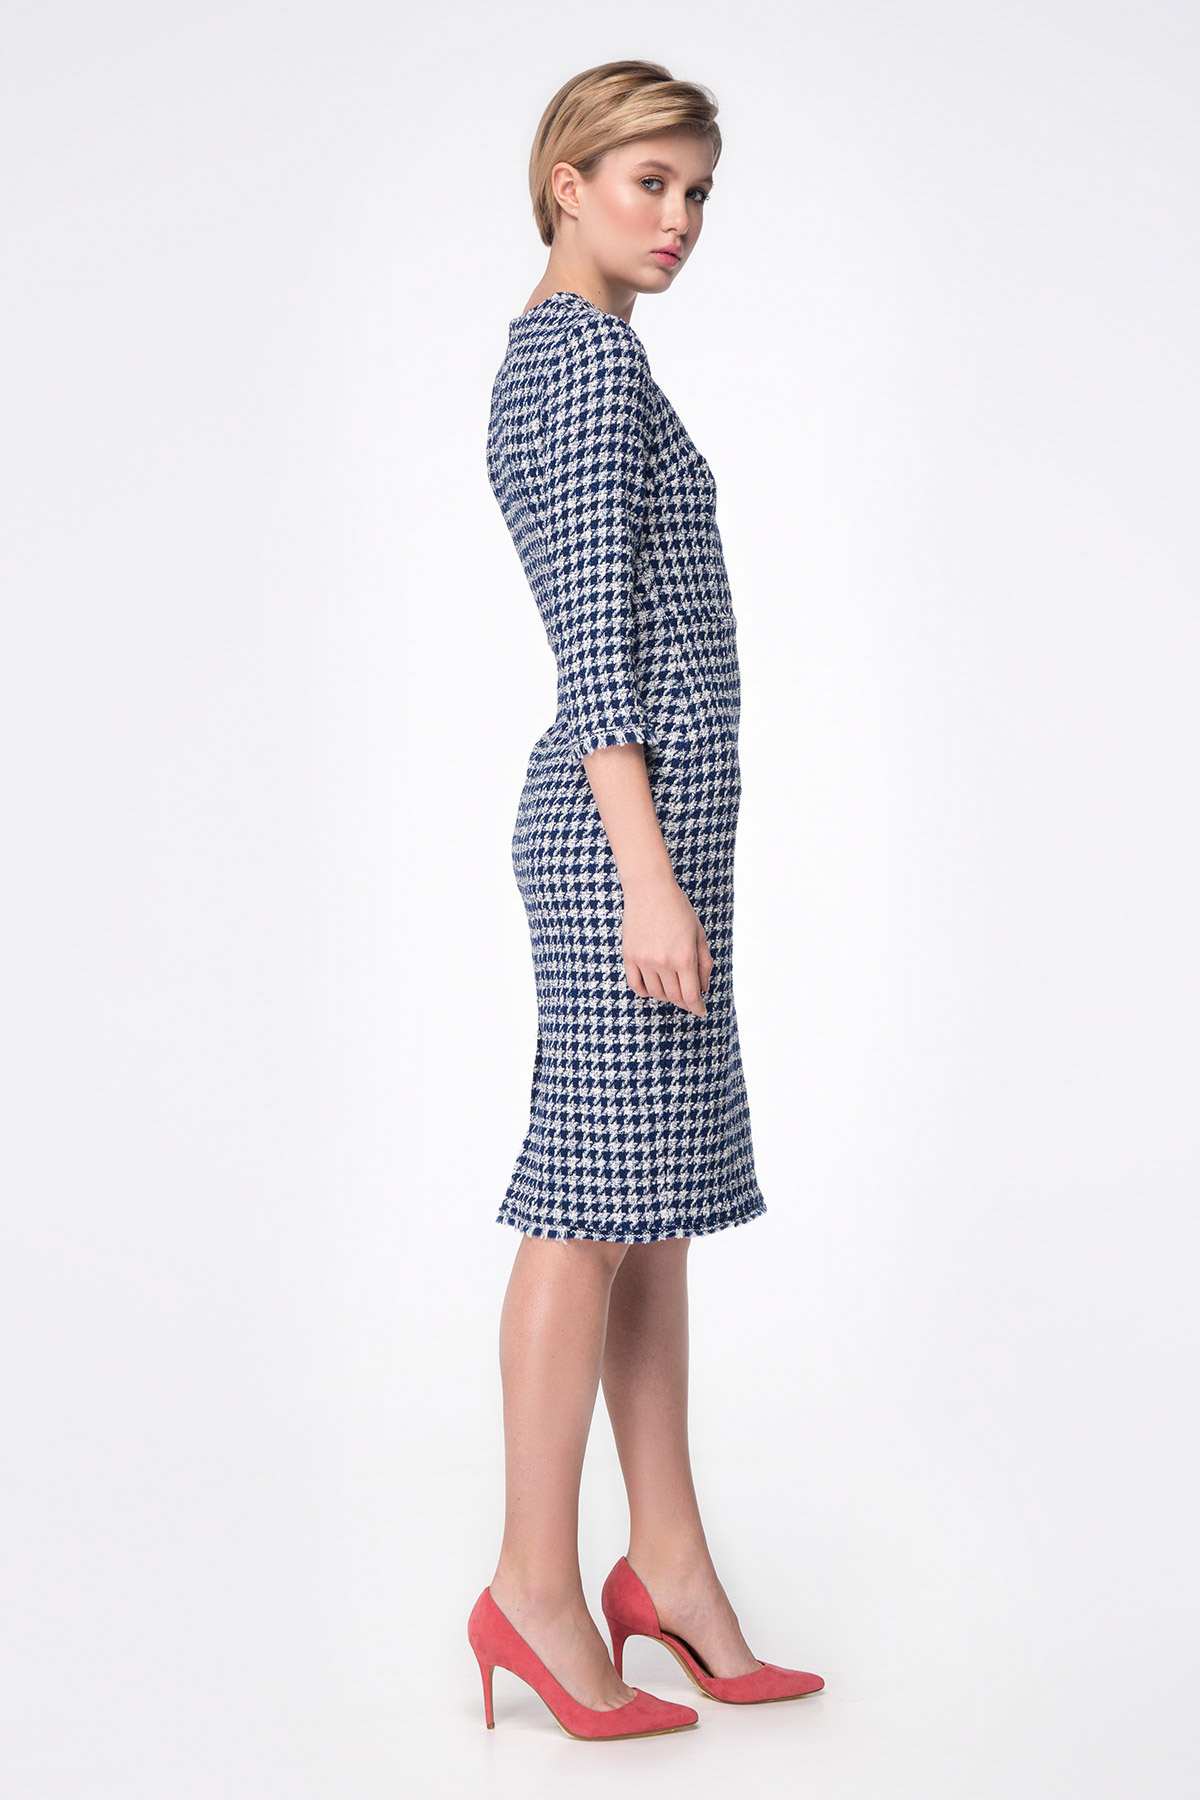 Column dress with blue&white houndstooth print, photo 11